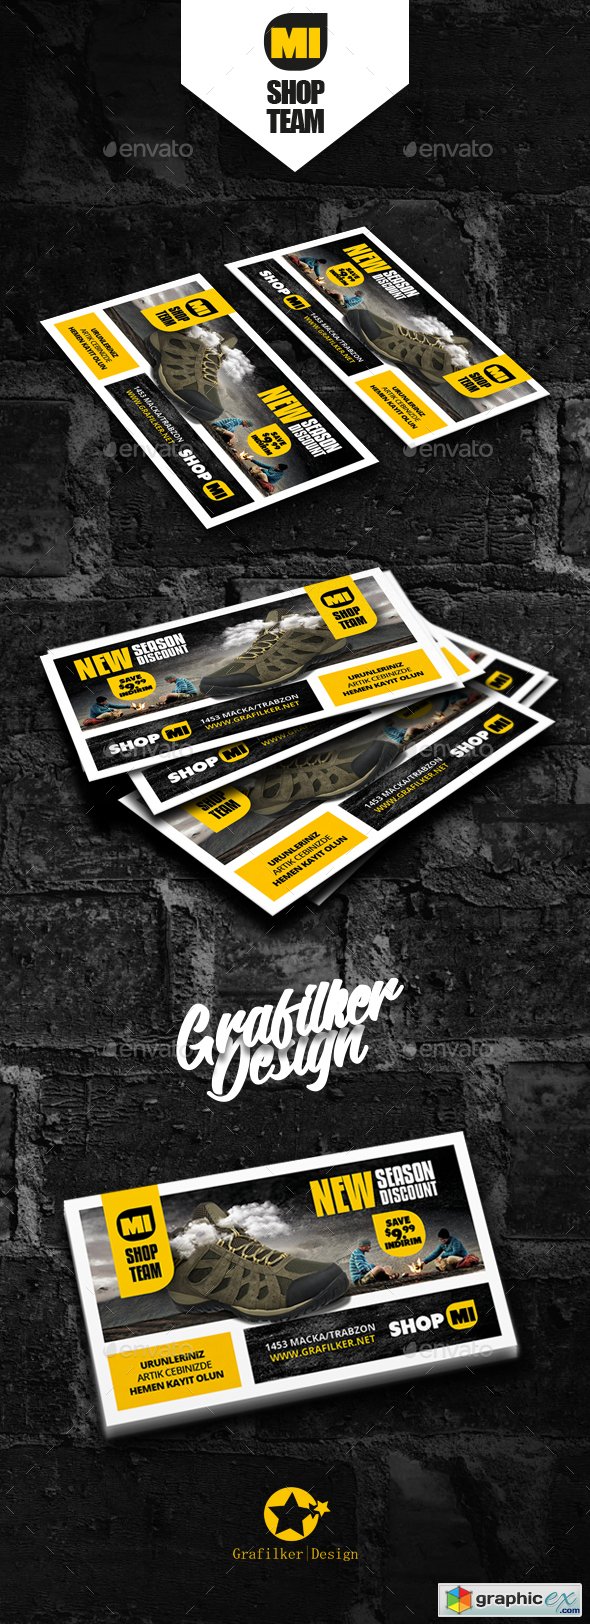 Shopping Product Business Card Templates